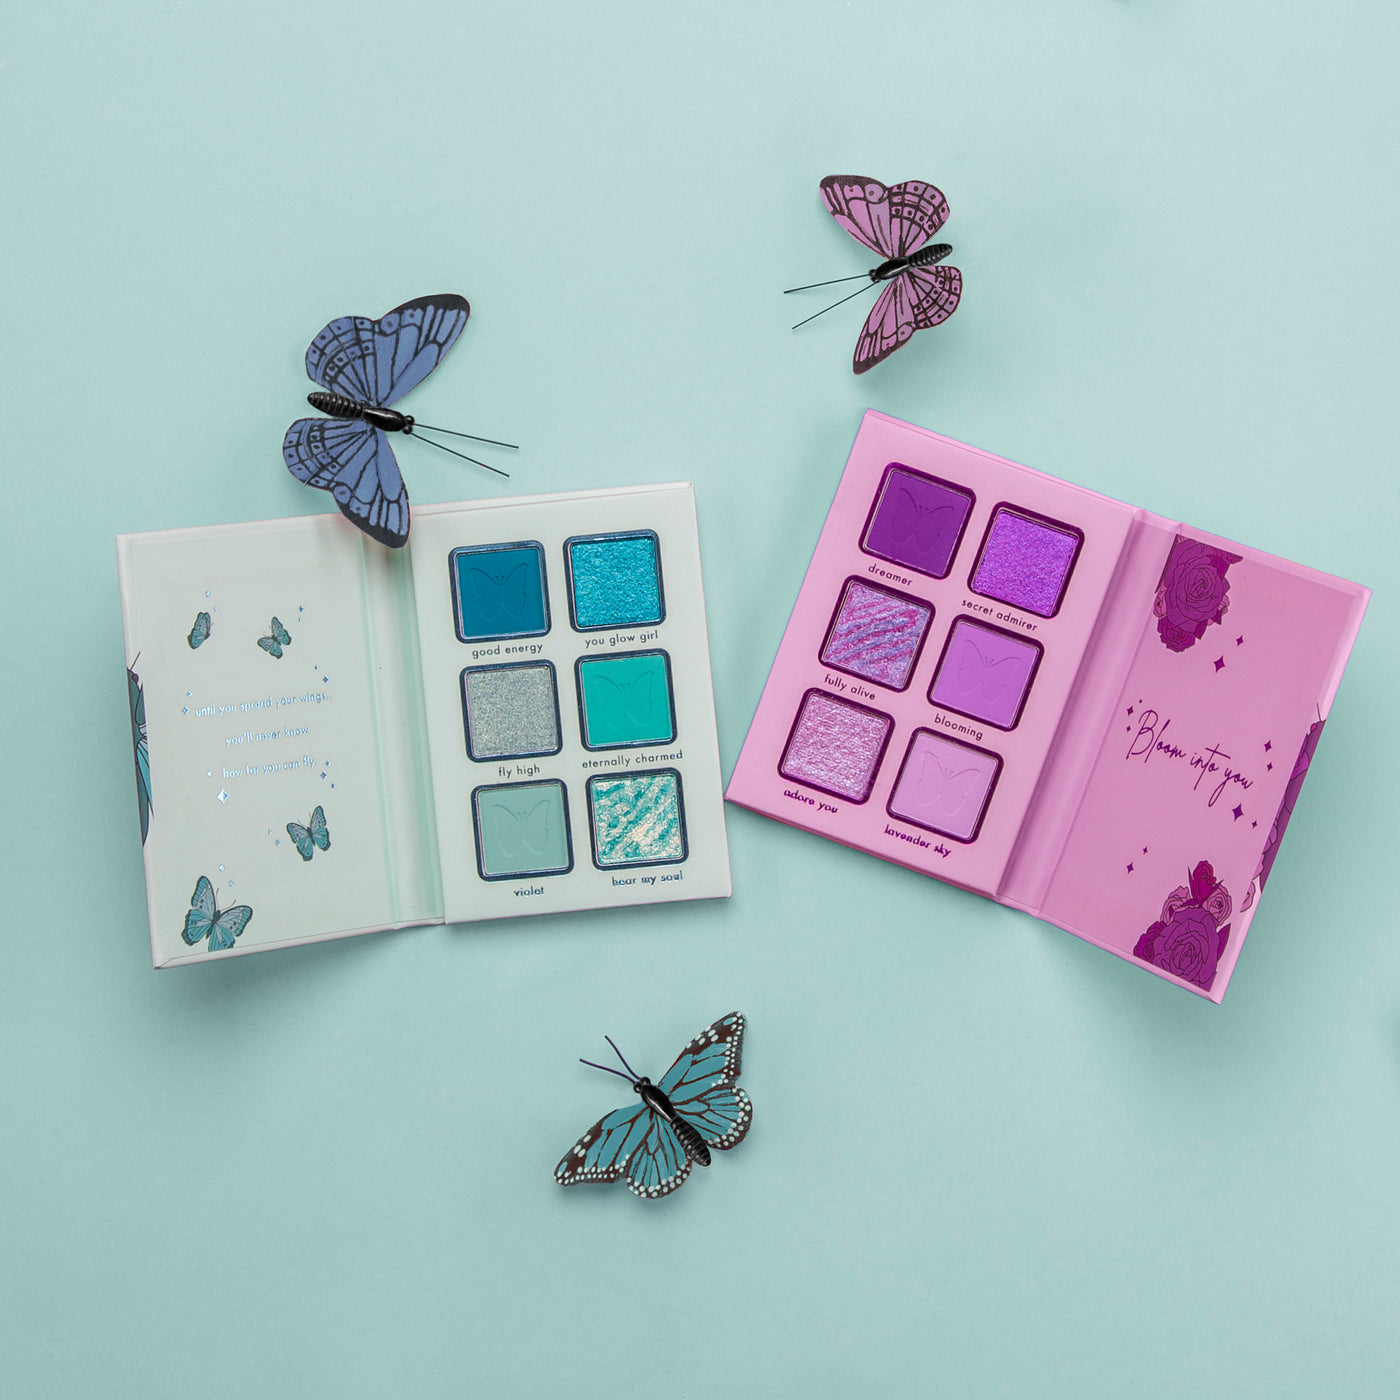 Bloom into you eyeshadow palette